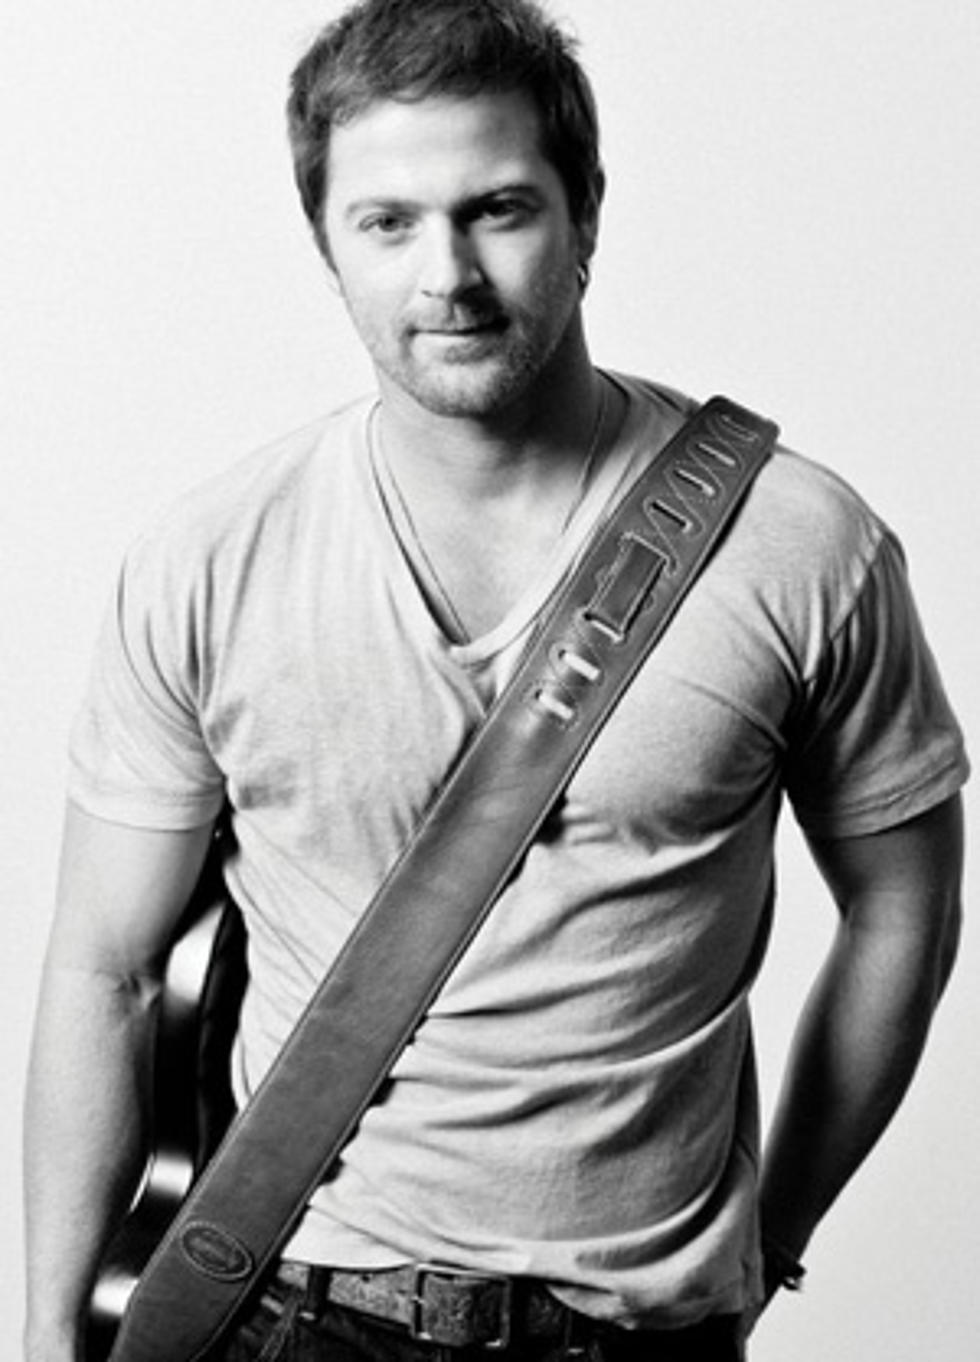 Kip Moore, &#8216;Mary Was the Marrying Kind&#8217; &#8211; Lyrics Uncovered